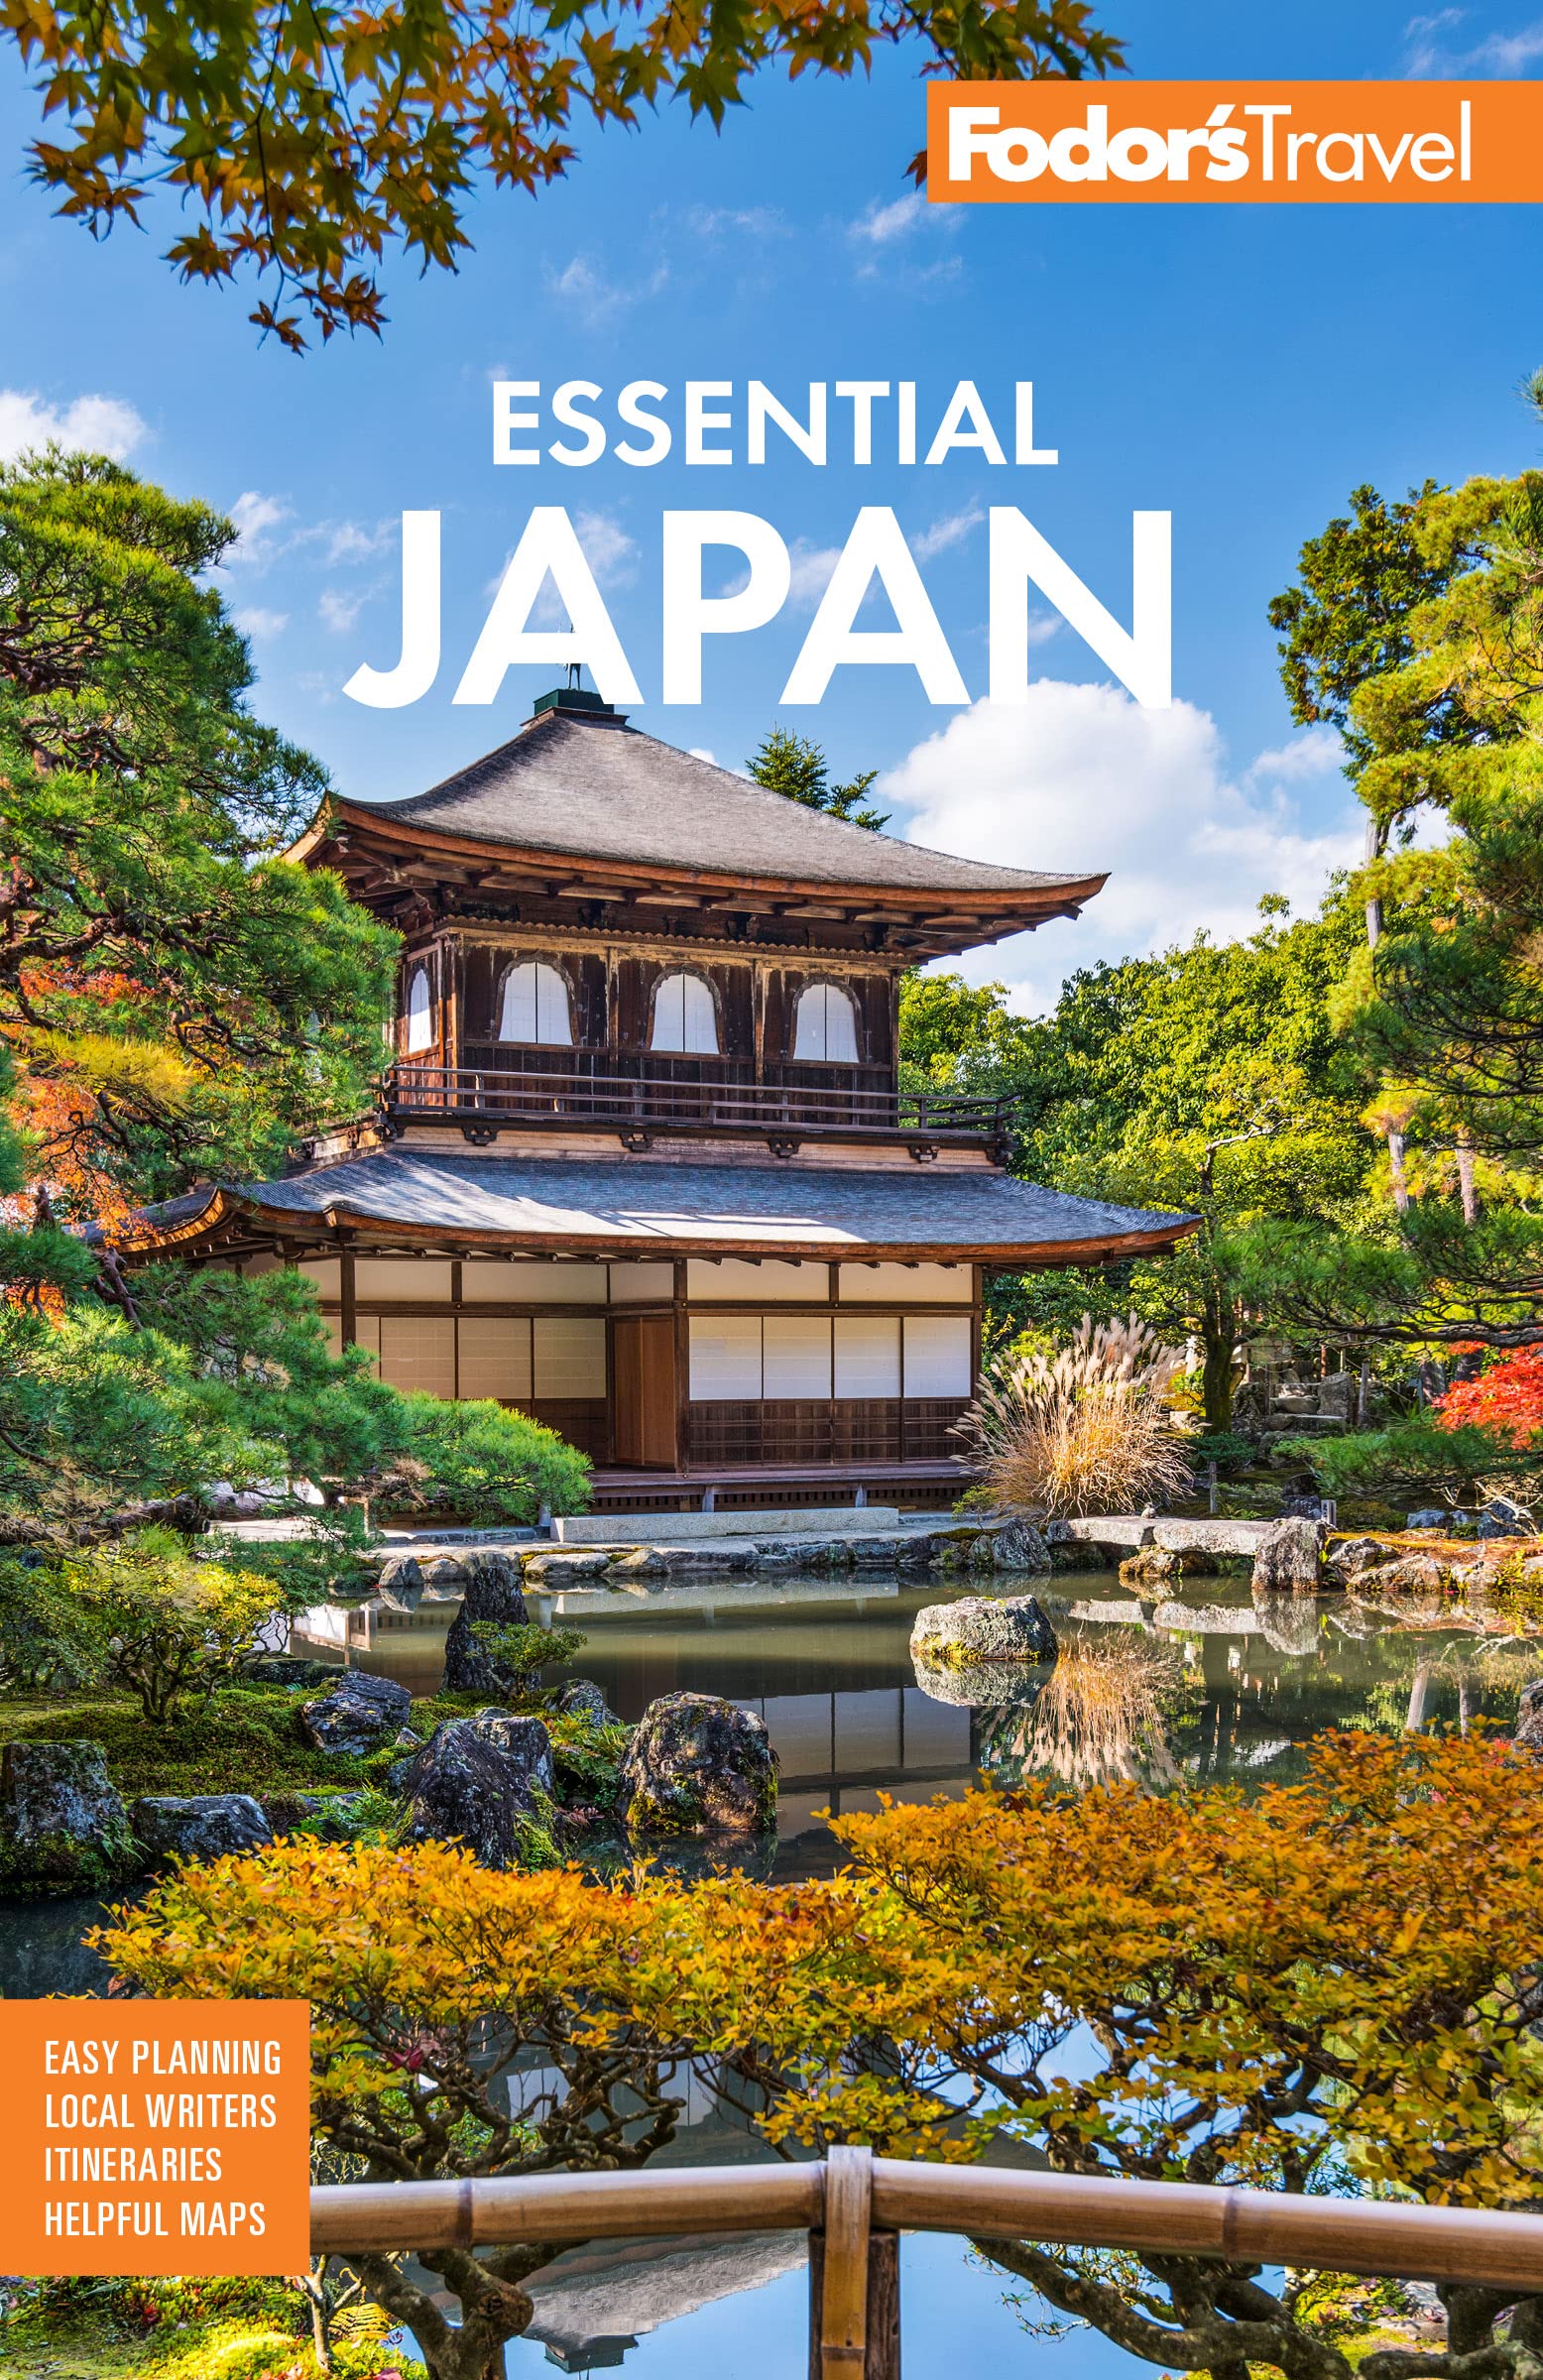 Fodor's Essential Japan by Fodor's Travel Guides